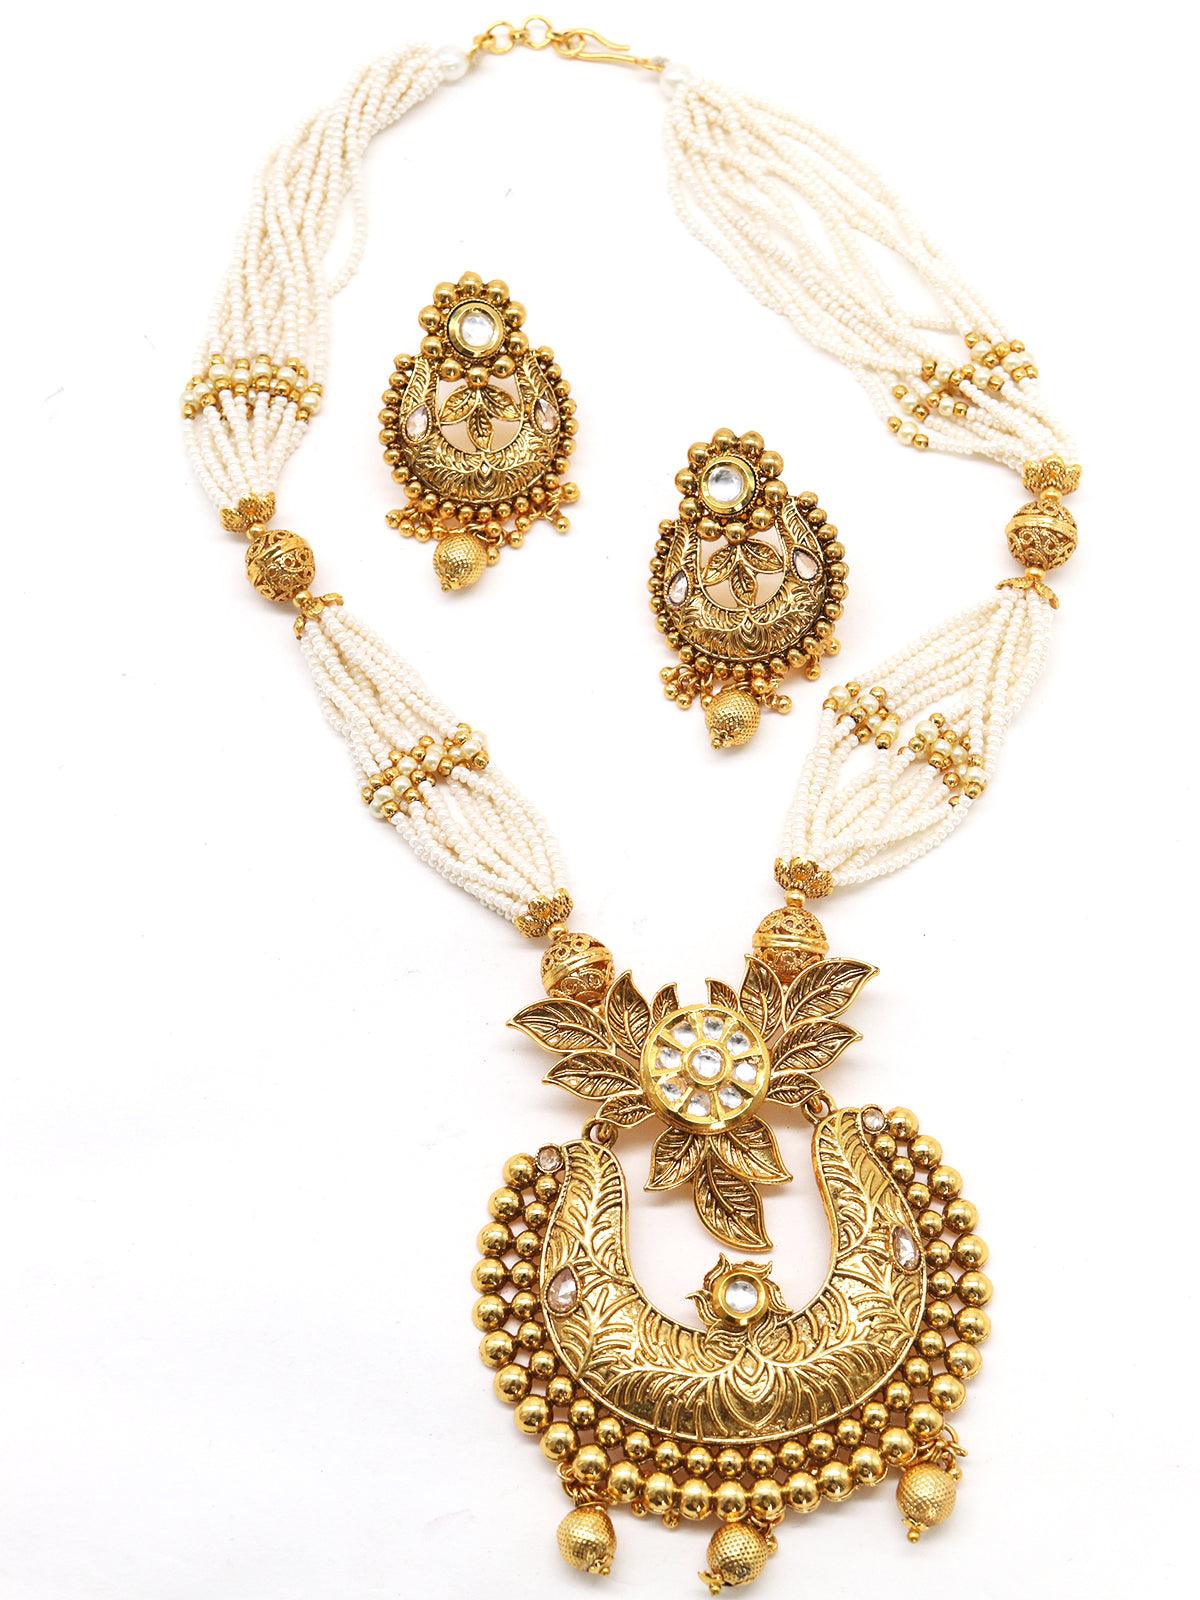 Antique dense faux pearl necklace with earrings - Odette